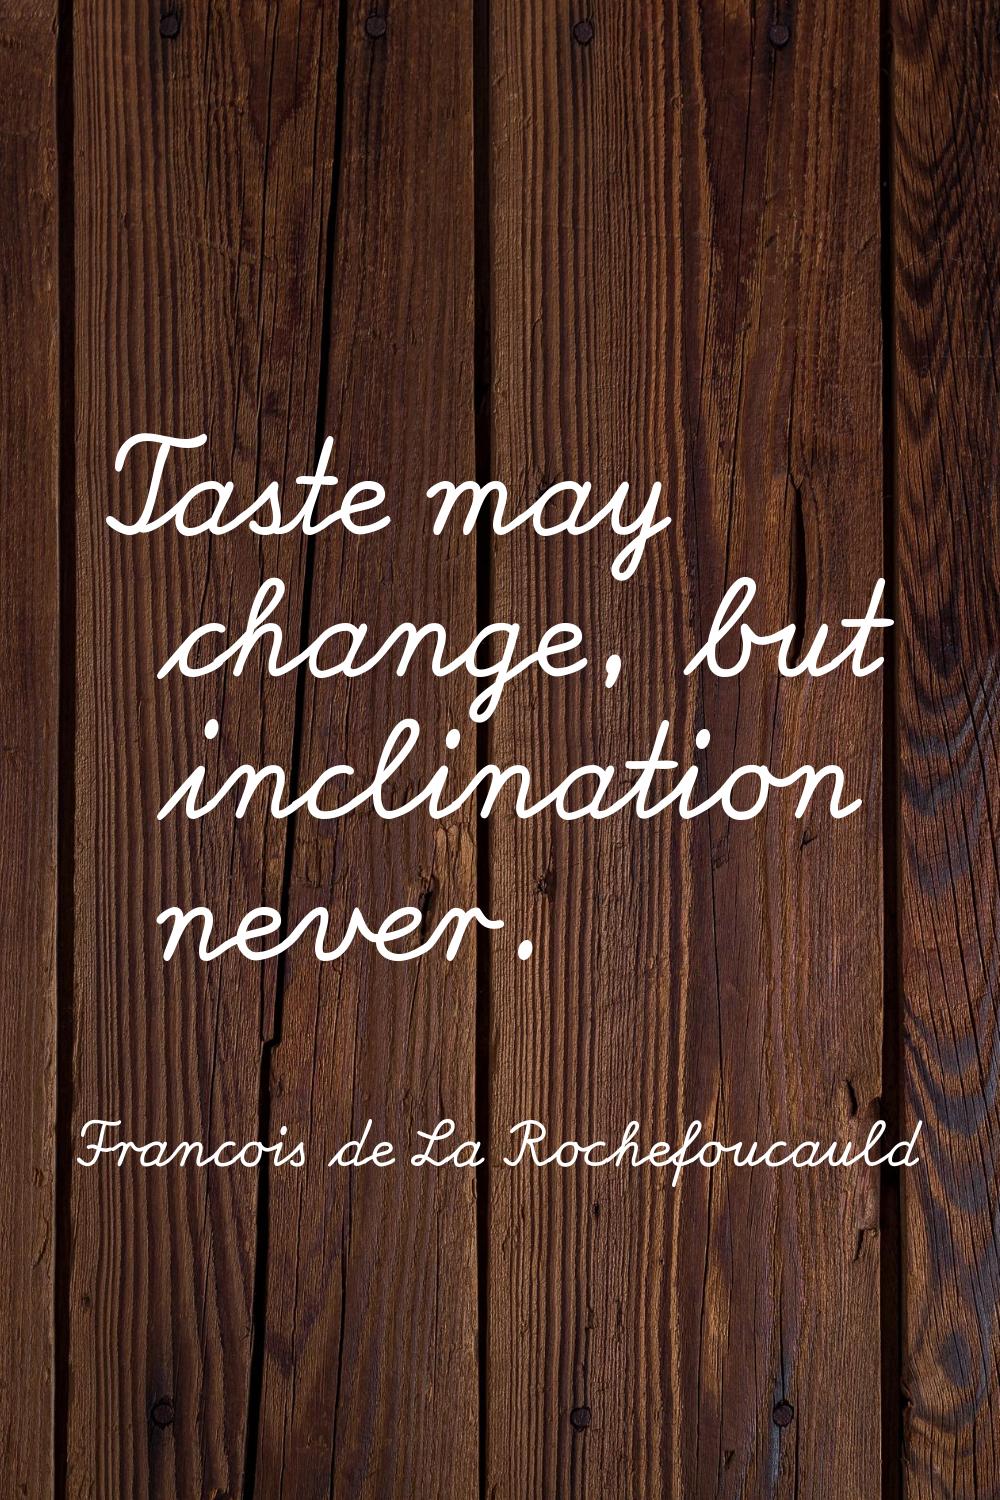 Taste may change, but inclination never.